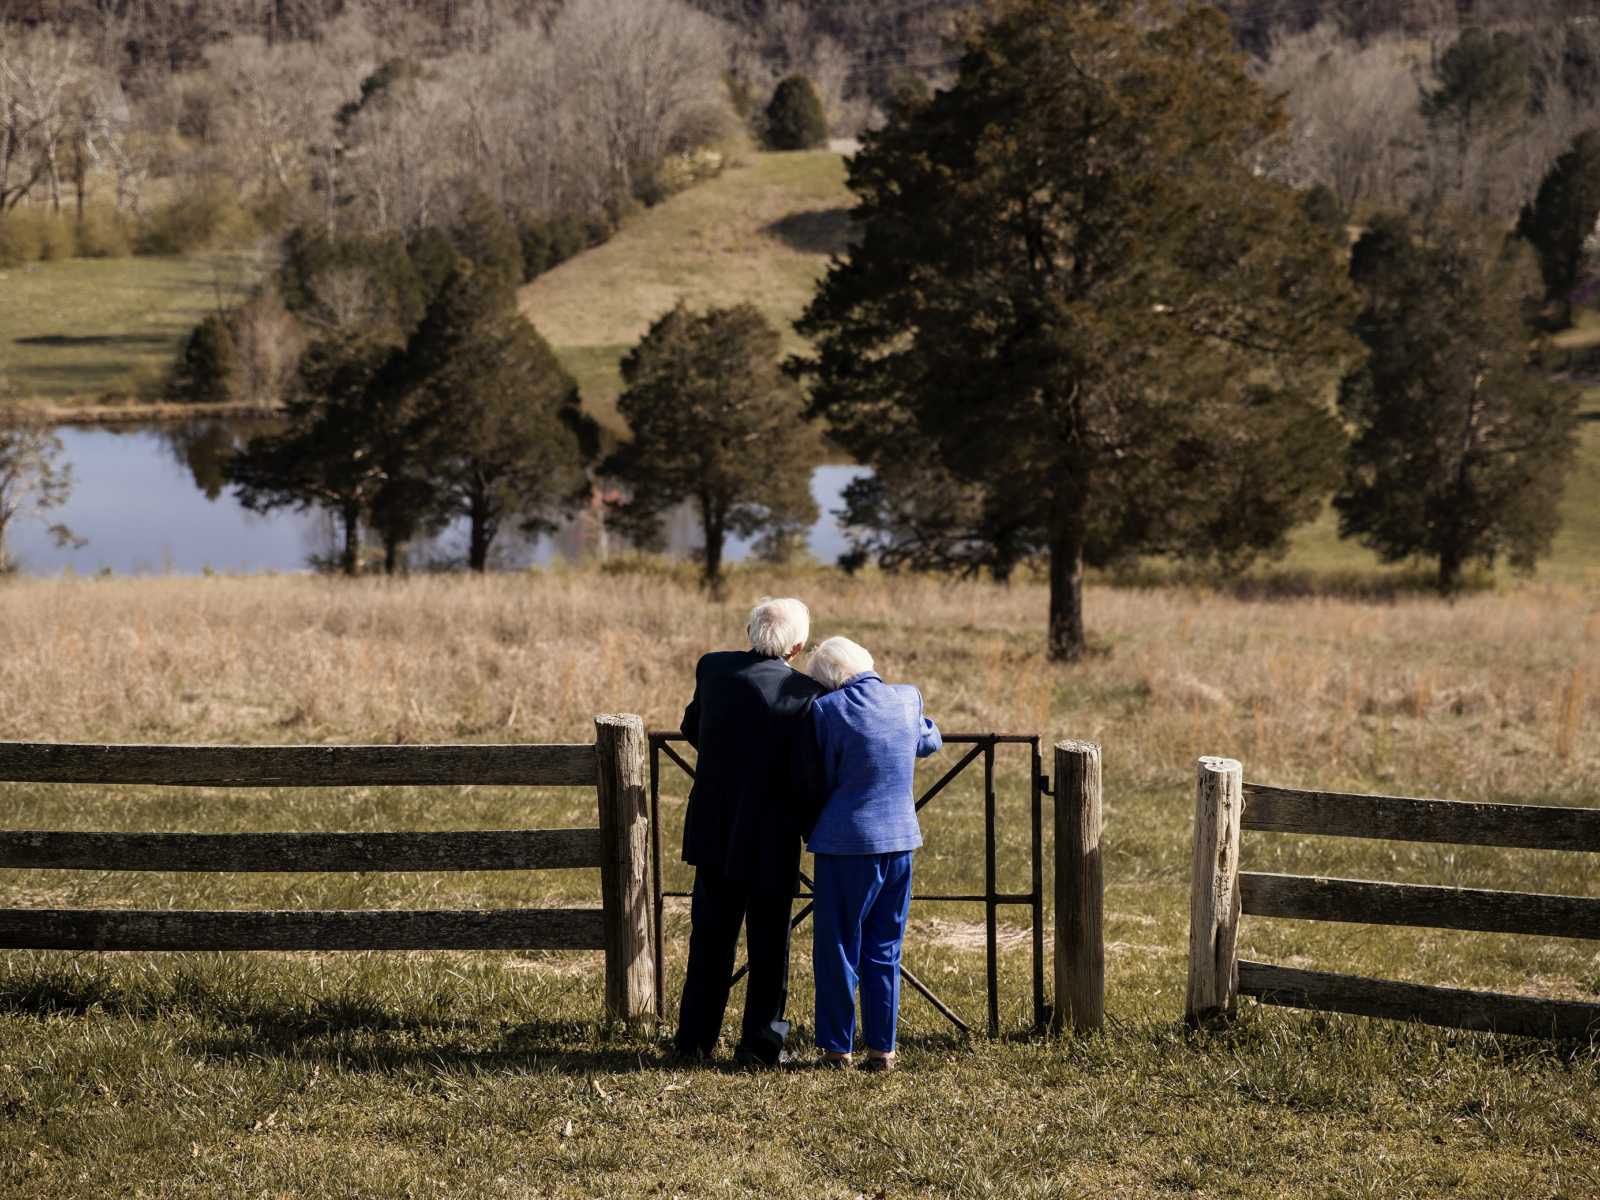 92 year old woman leans on her husband as they stand looking out at grass field 